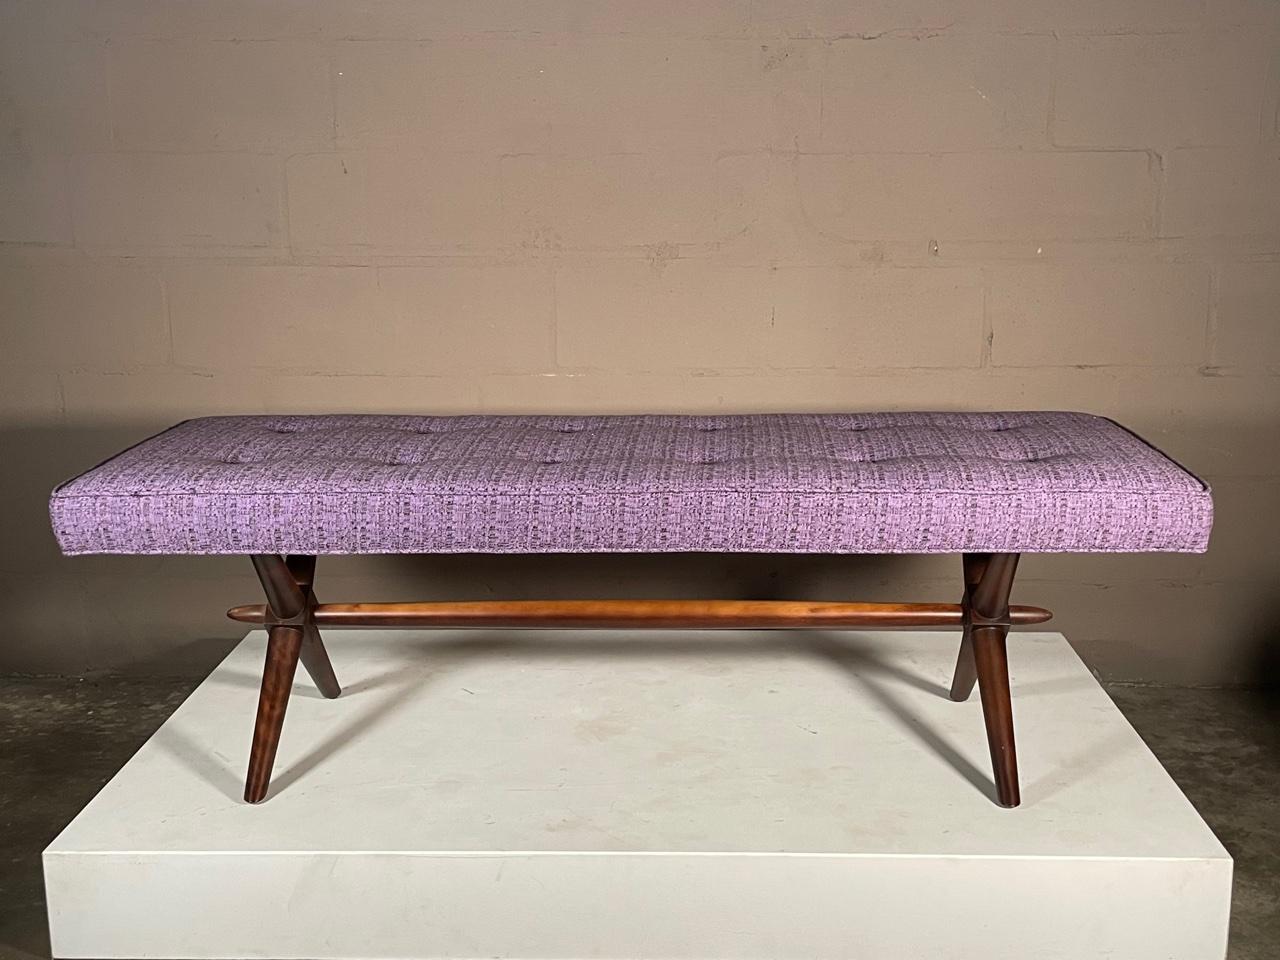 A classic T.H. Robsjohn-Gibbings for Widdicomb upholstered bench. Solid walnut X base, upholstered in NOS vintage fabric (sample available).